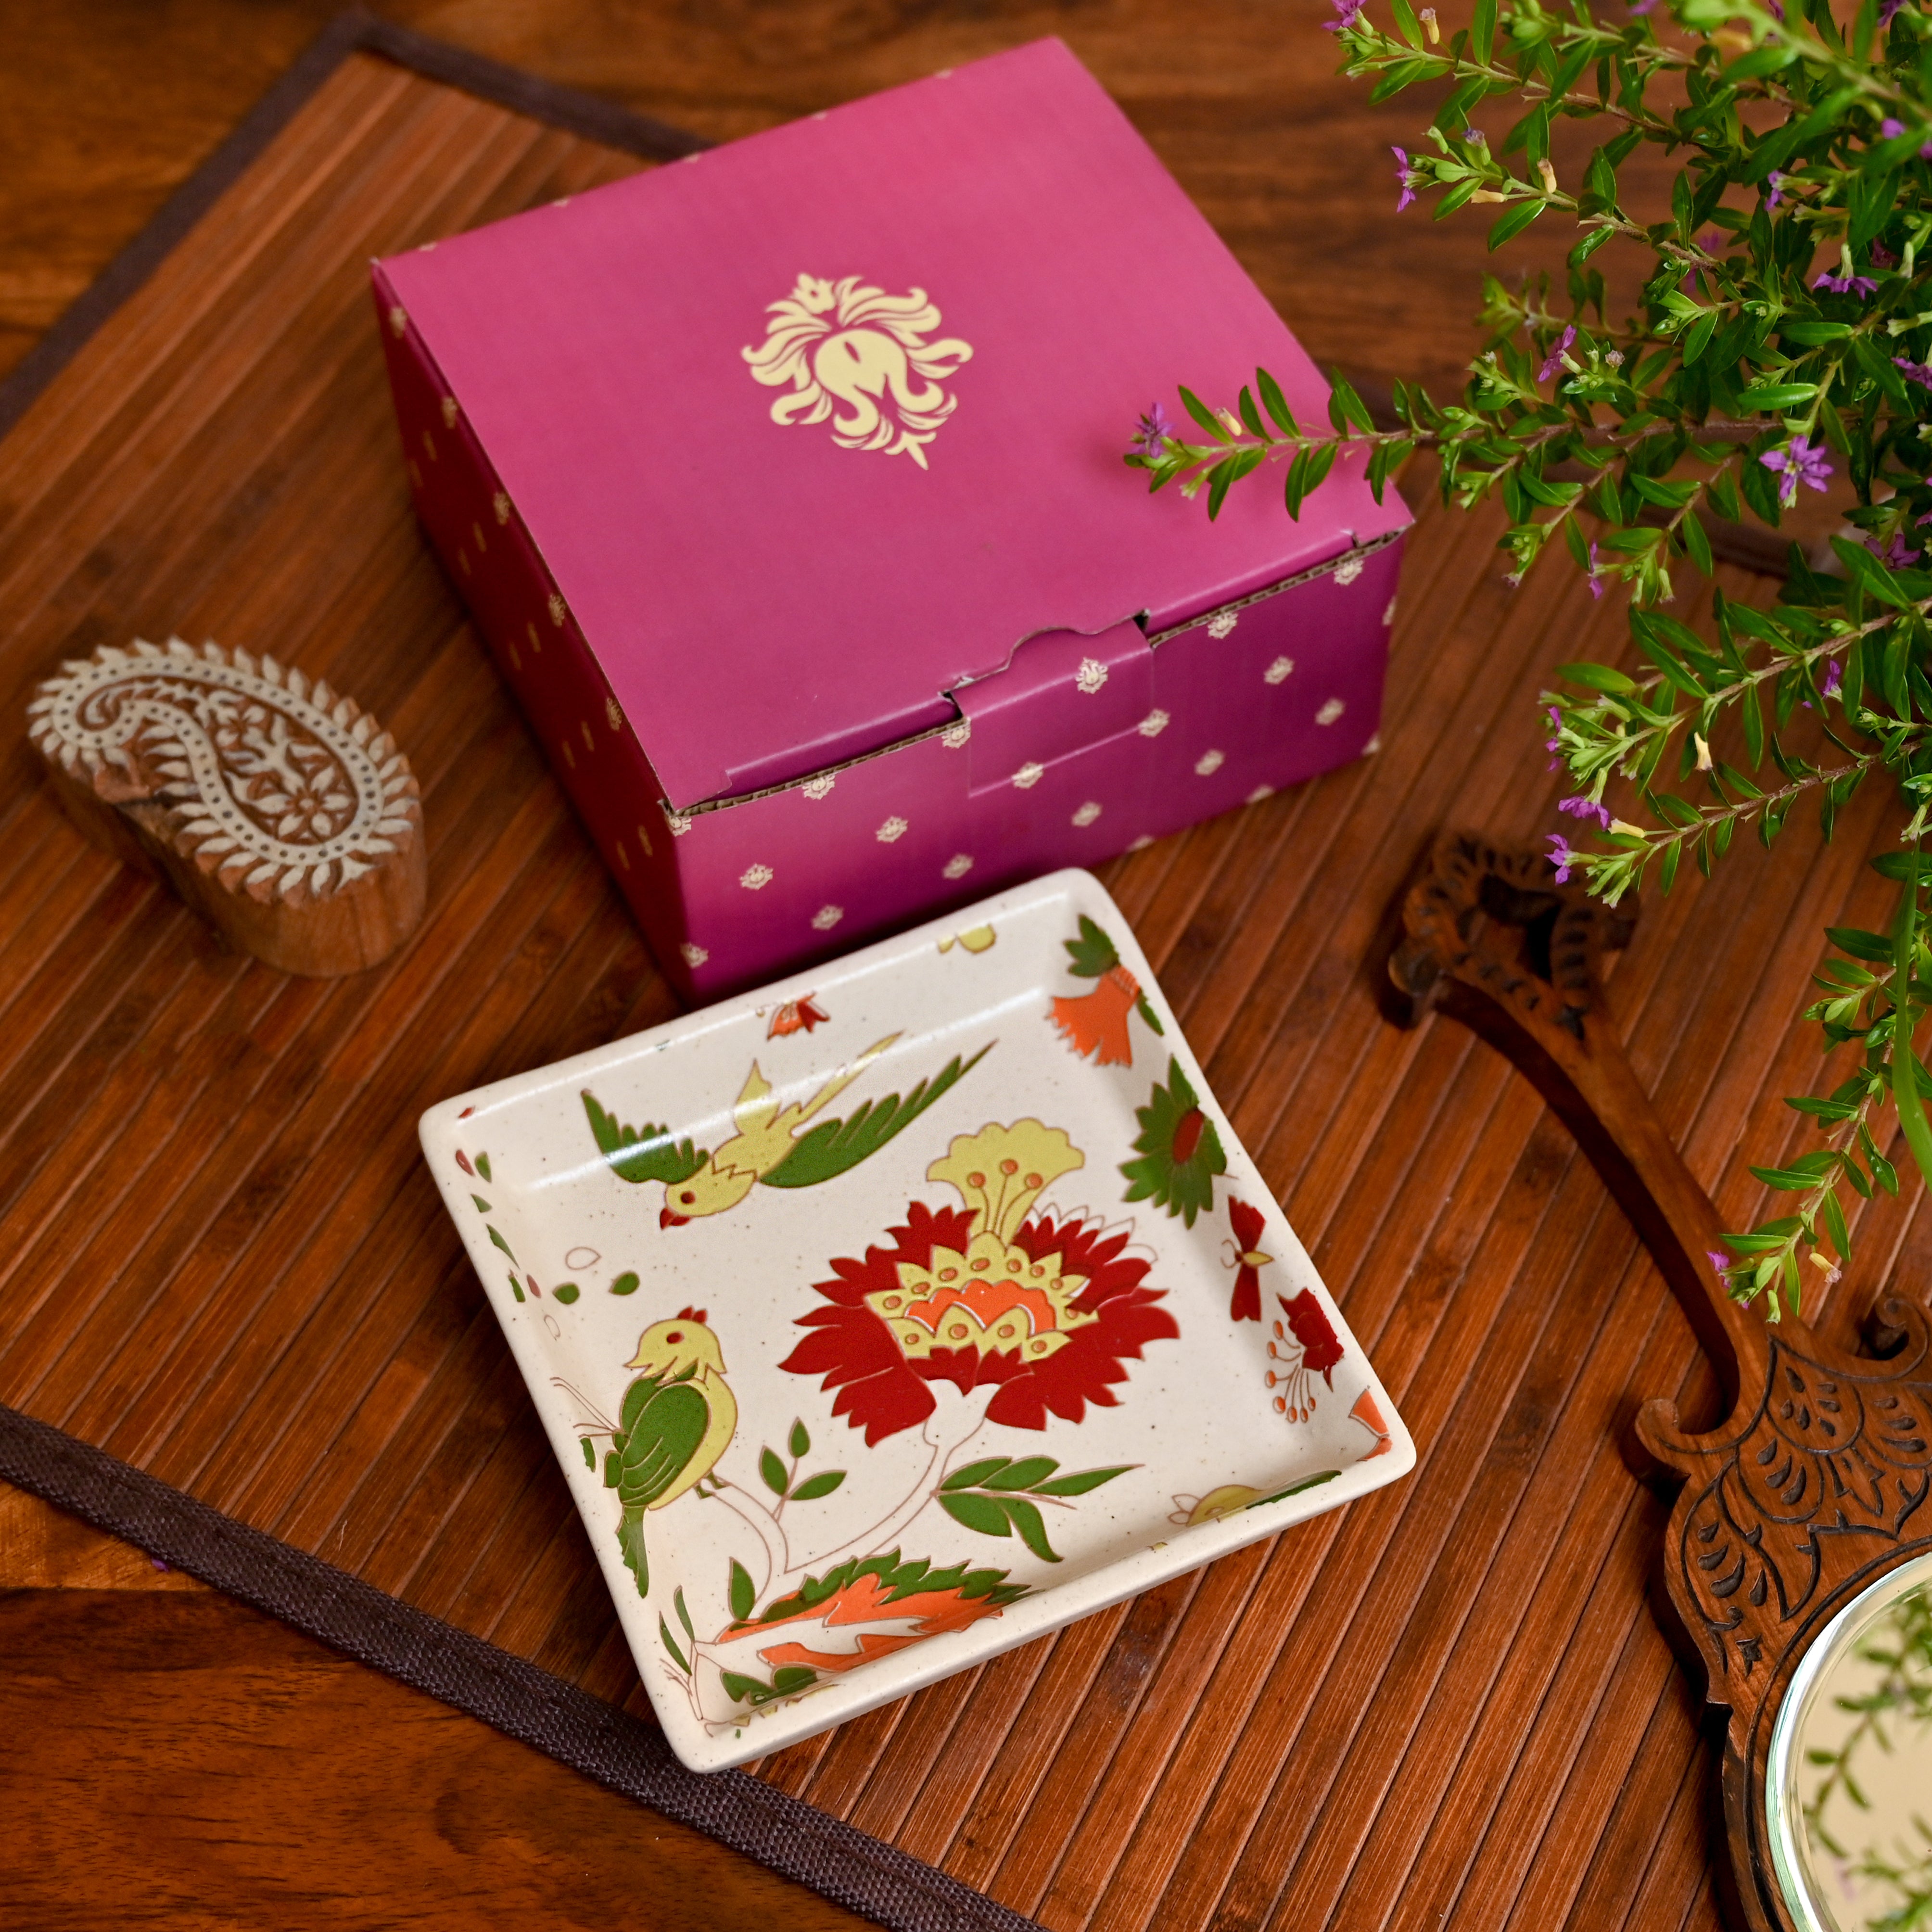 Indha Handcrafted Gift Box | Hand Embroidered Box | Diwali Gifting |  Handmade Gifting | Handmade Gift Box - Curated online shop for handcrafted  products made in India by women artisans